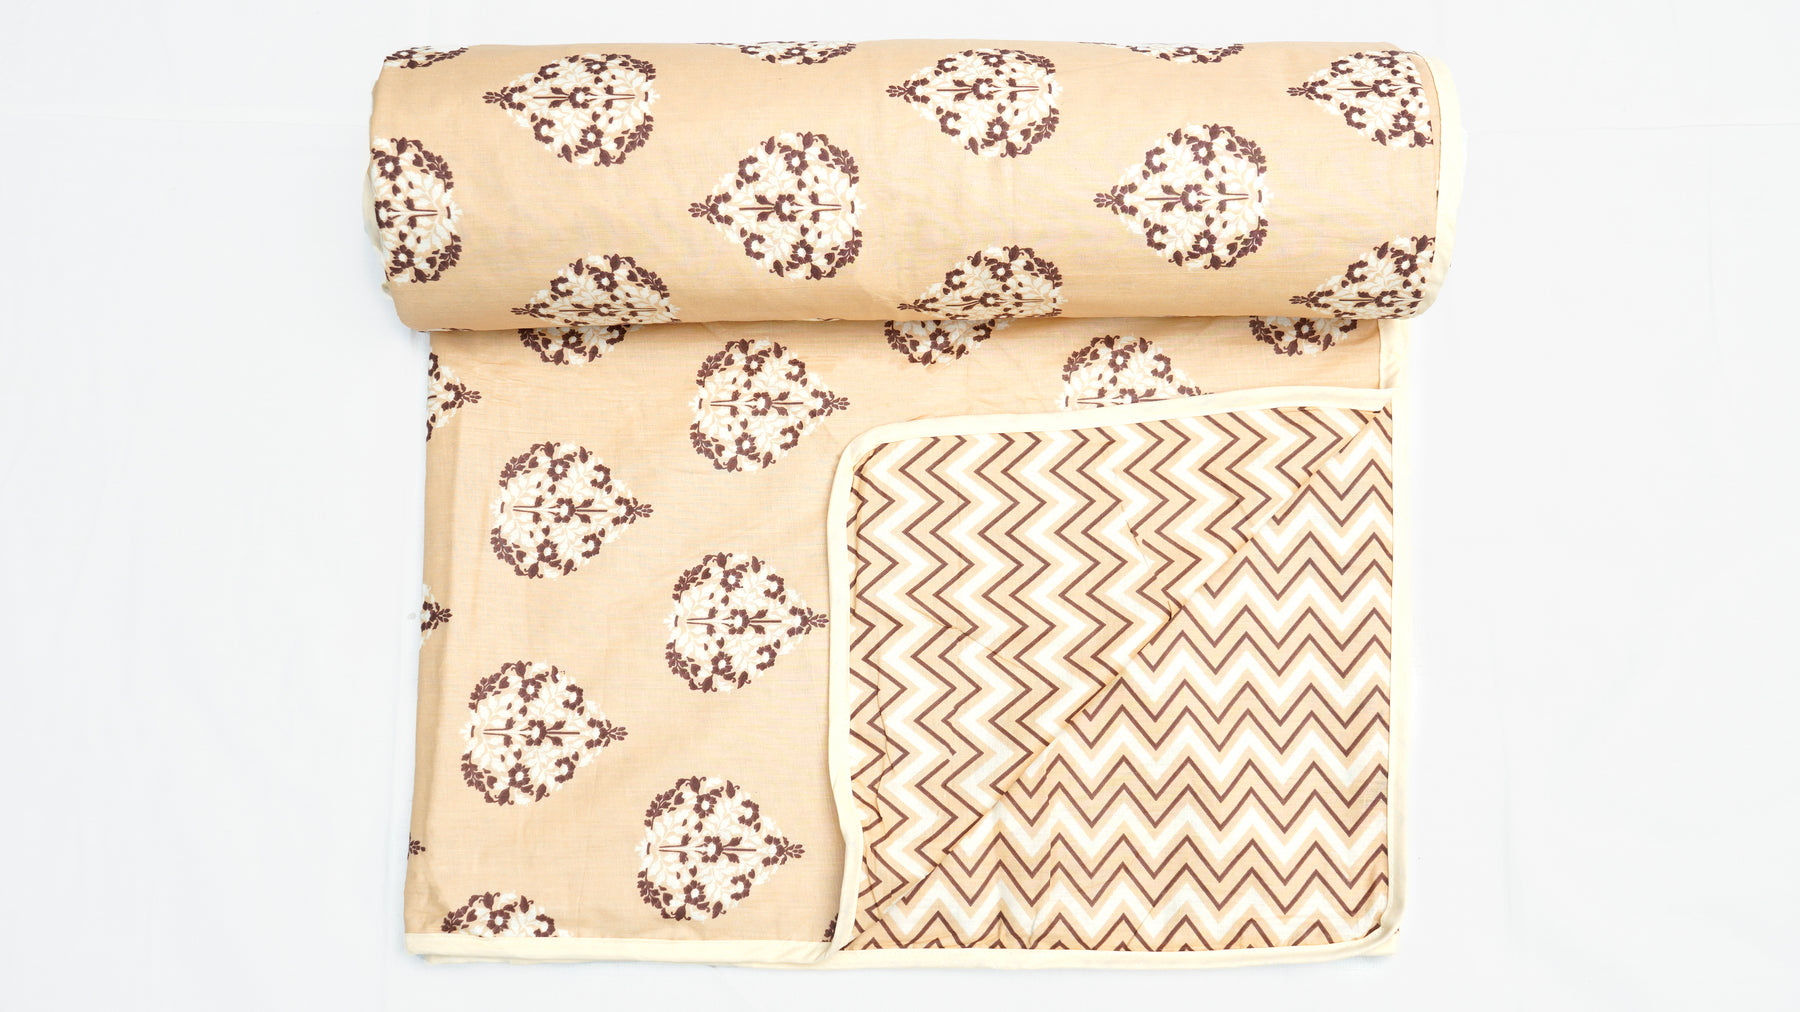 100% Cotton reversible single size Dohar/AC Blankets with Brown zig zag and floral prints